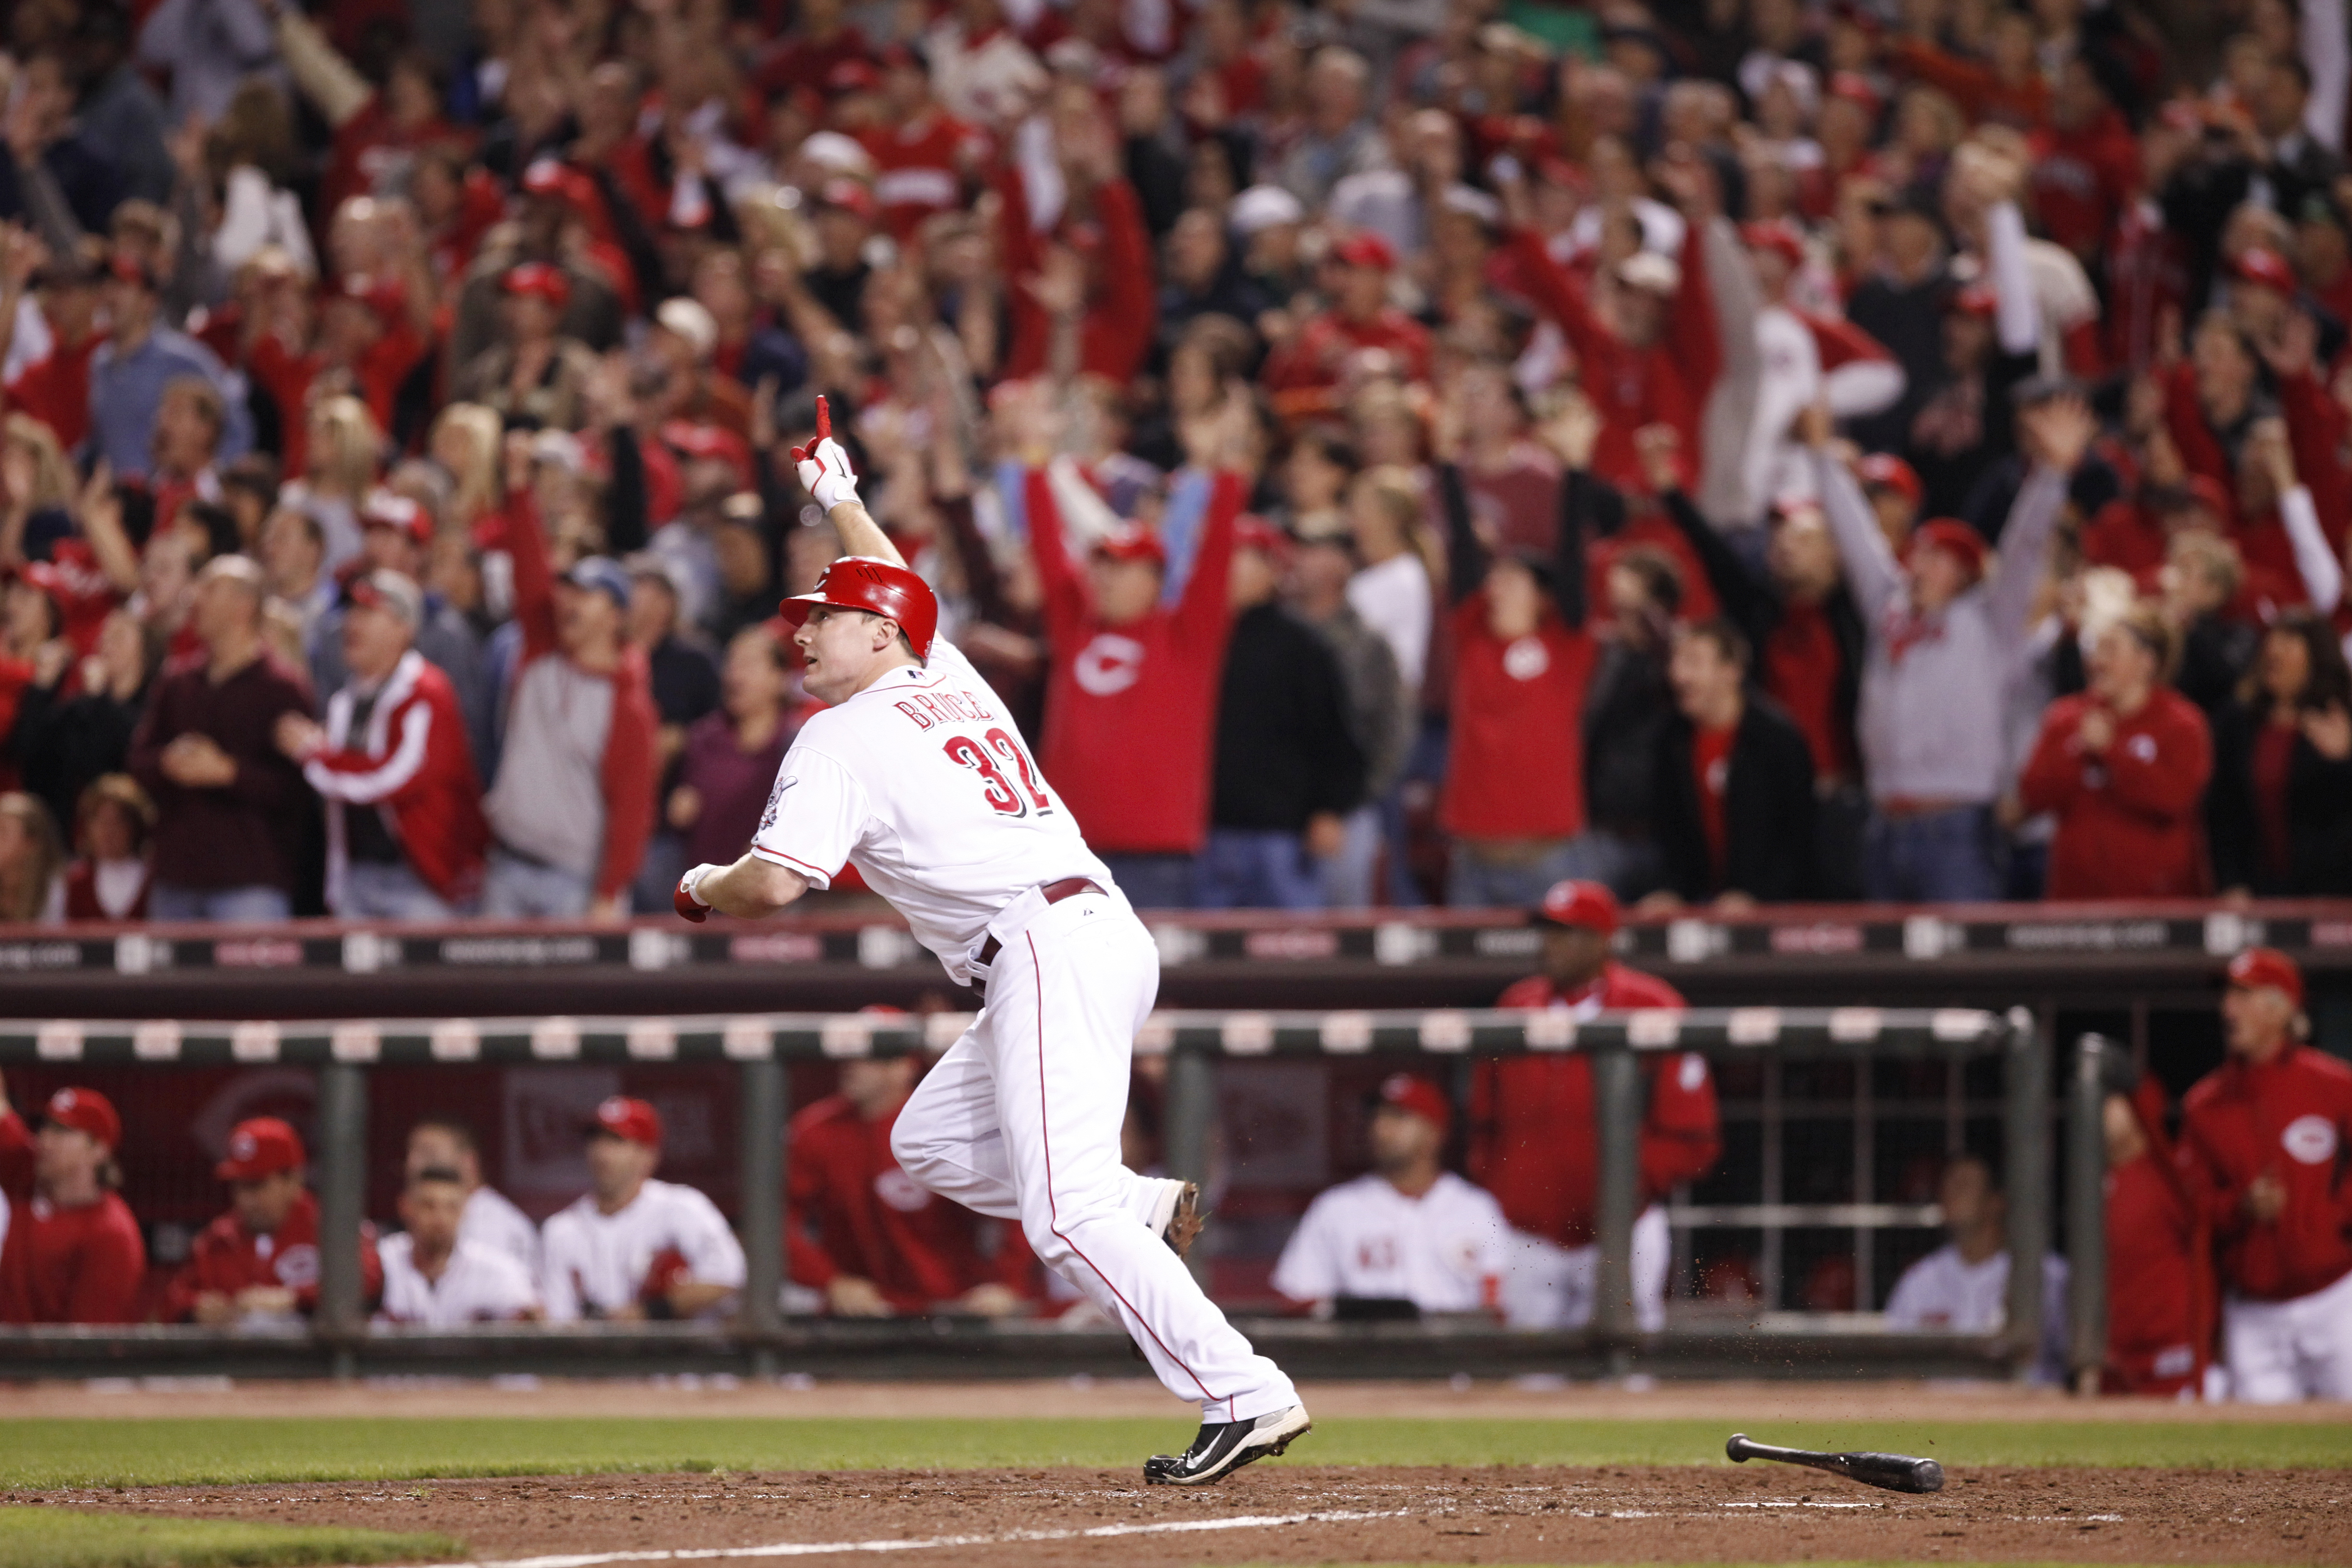 CINCINNATI, OH - SEPTEMBER 28: Jay Bruce #32 of the Cincinnati Reds celebrates a walk off home run against the Houston Astros at Great American Ball Park on September 28, 2010 in Cincinnati, Ohio. The Reds won 3-2 to clinch the NL Central Division title.